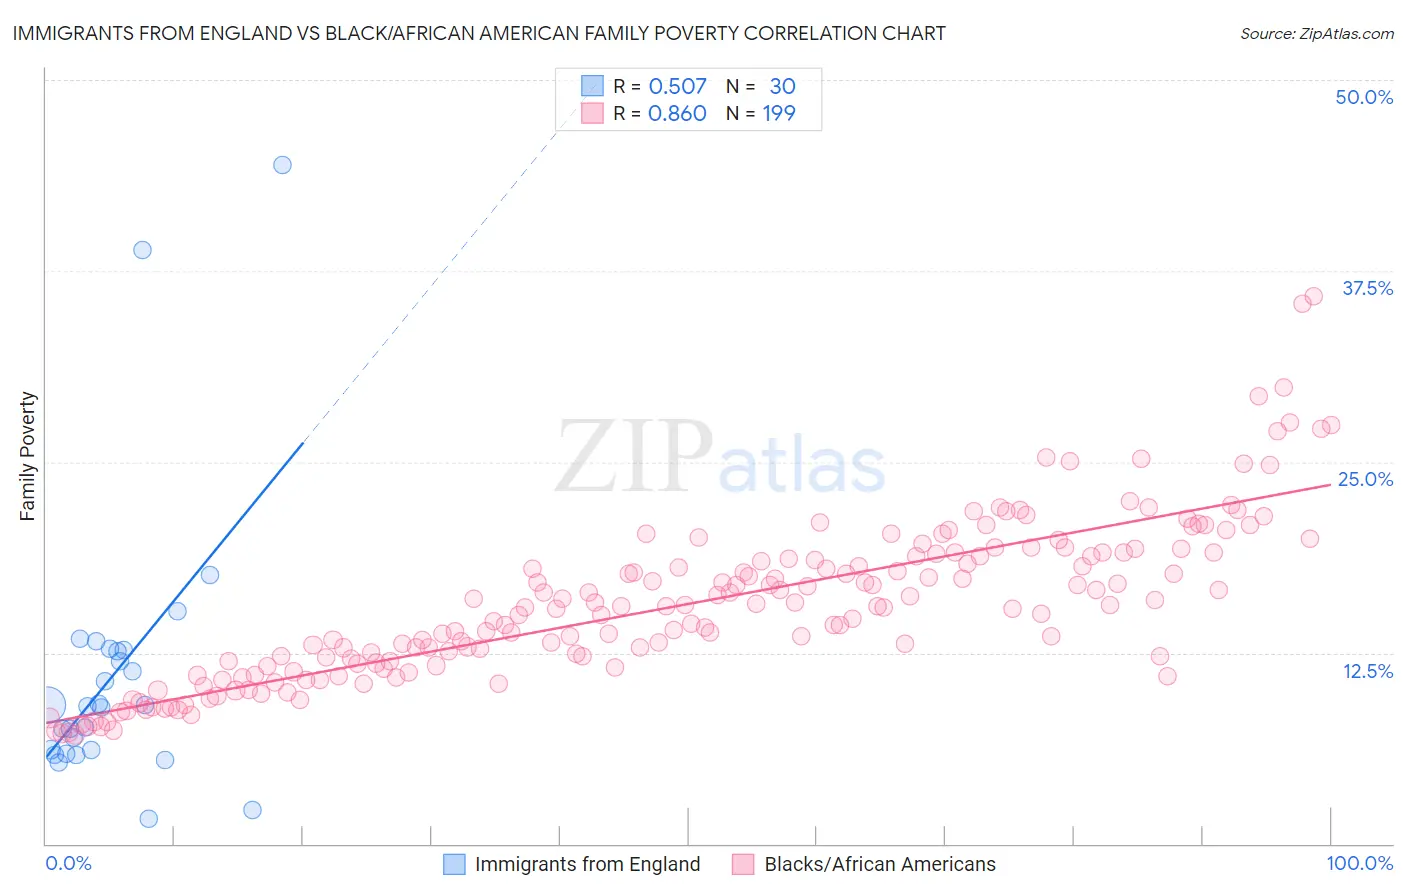 Immigrants from England vs Black/African American Family Poverty